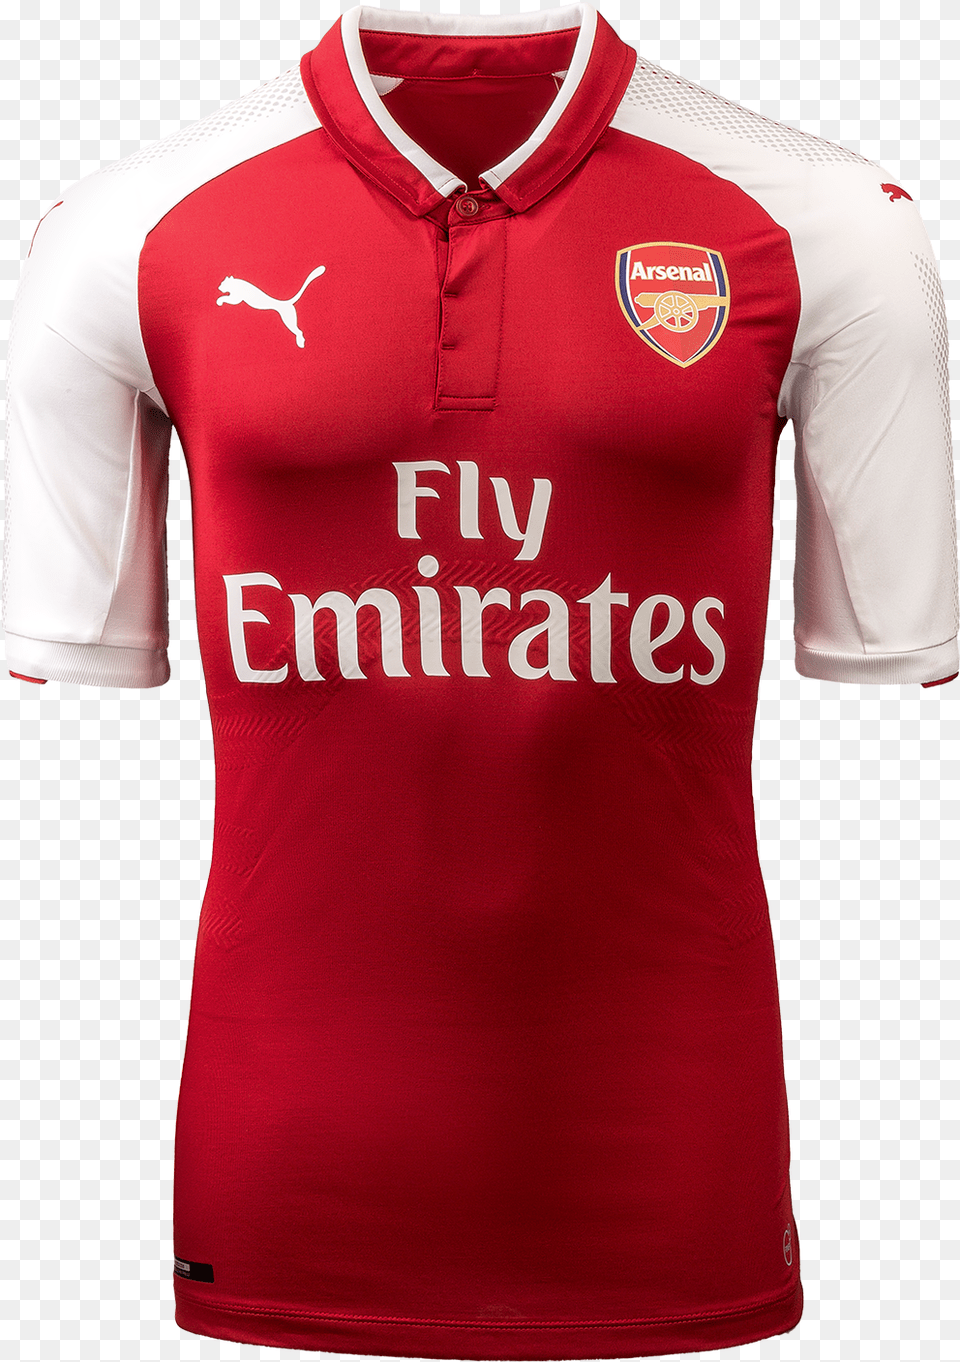 Arsenal Home Authentic Jersey Ez Football Vietnam Arsenal Home Kit 2017 Clothing, Shirt, T-shirt Free Png Download